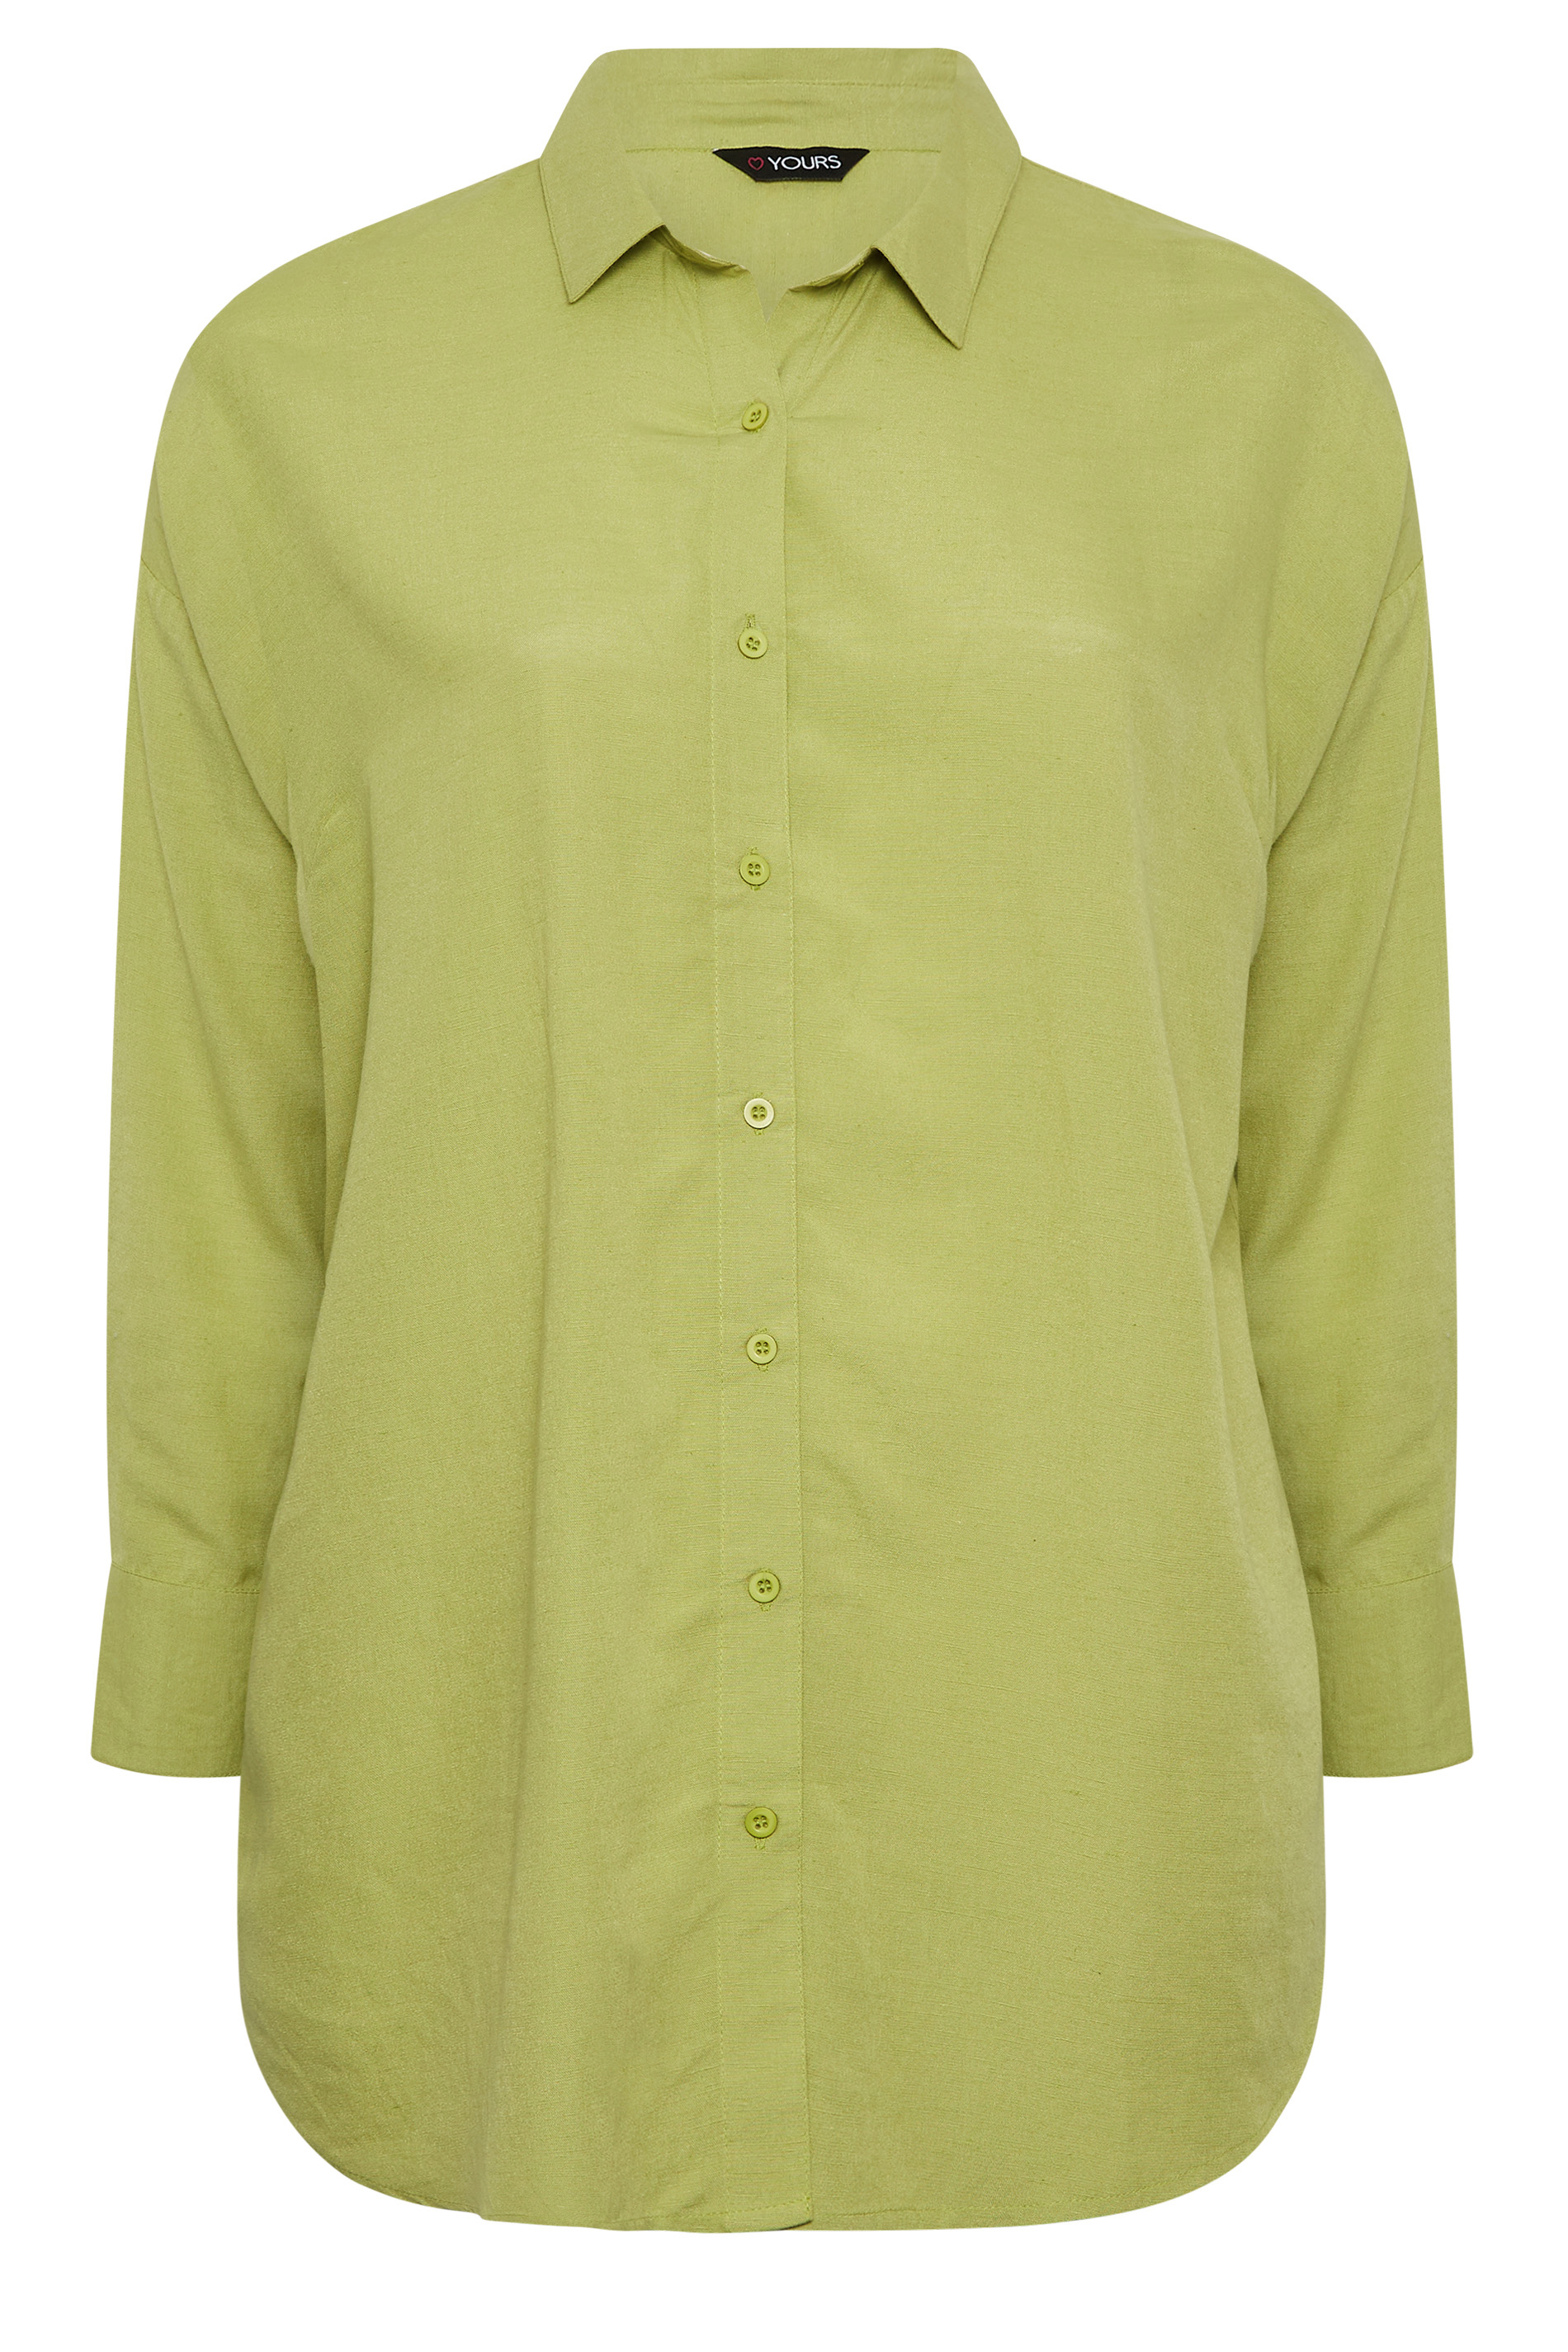 YOURS Plus Size Green Linen Blend Shirt | Yours Clothing